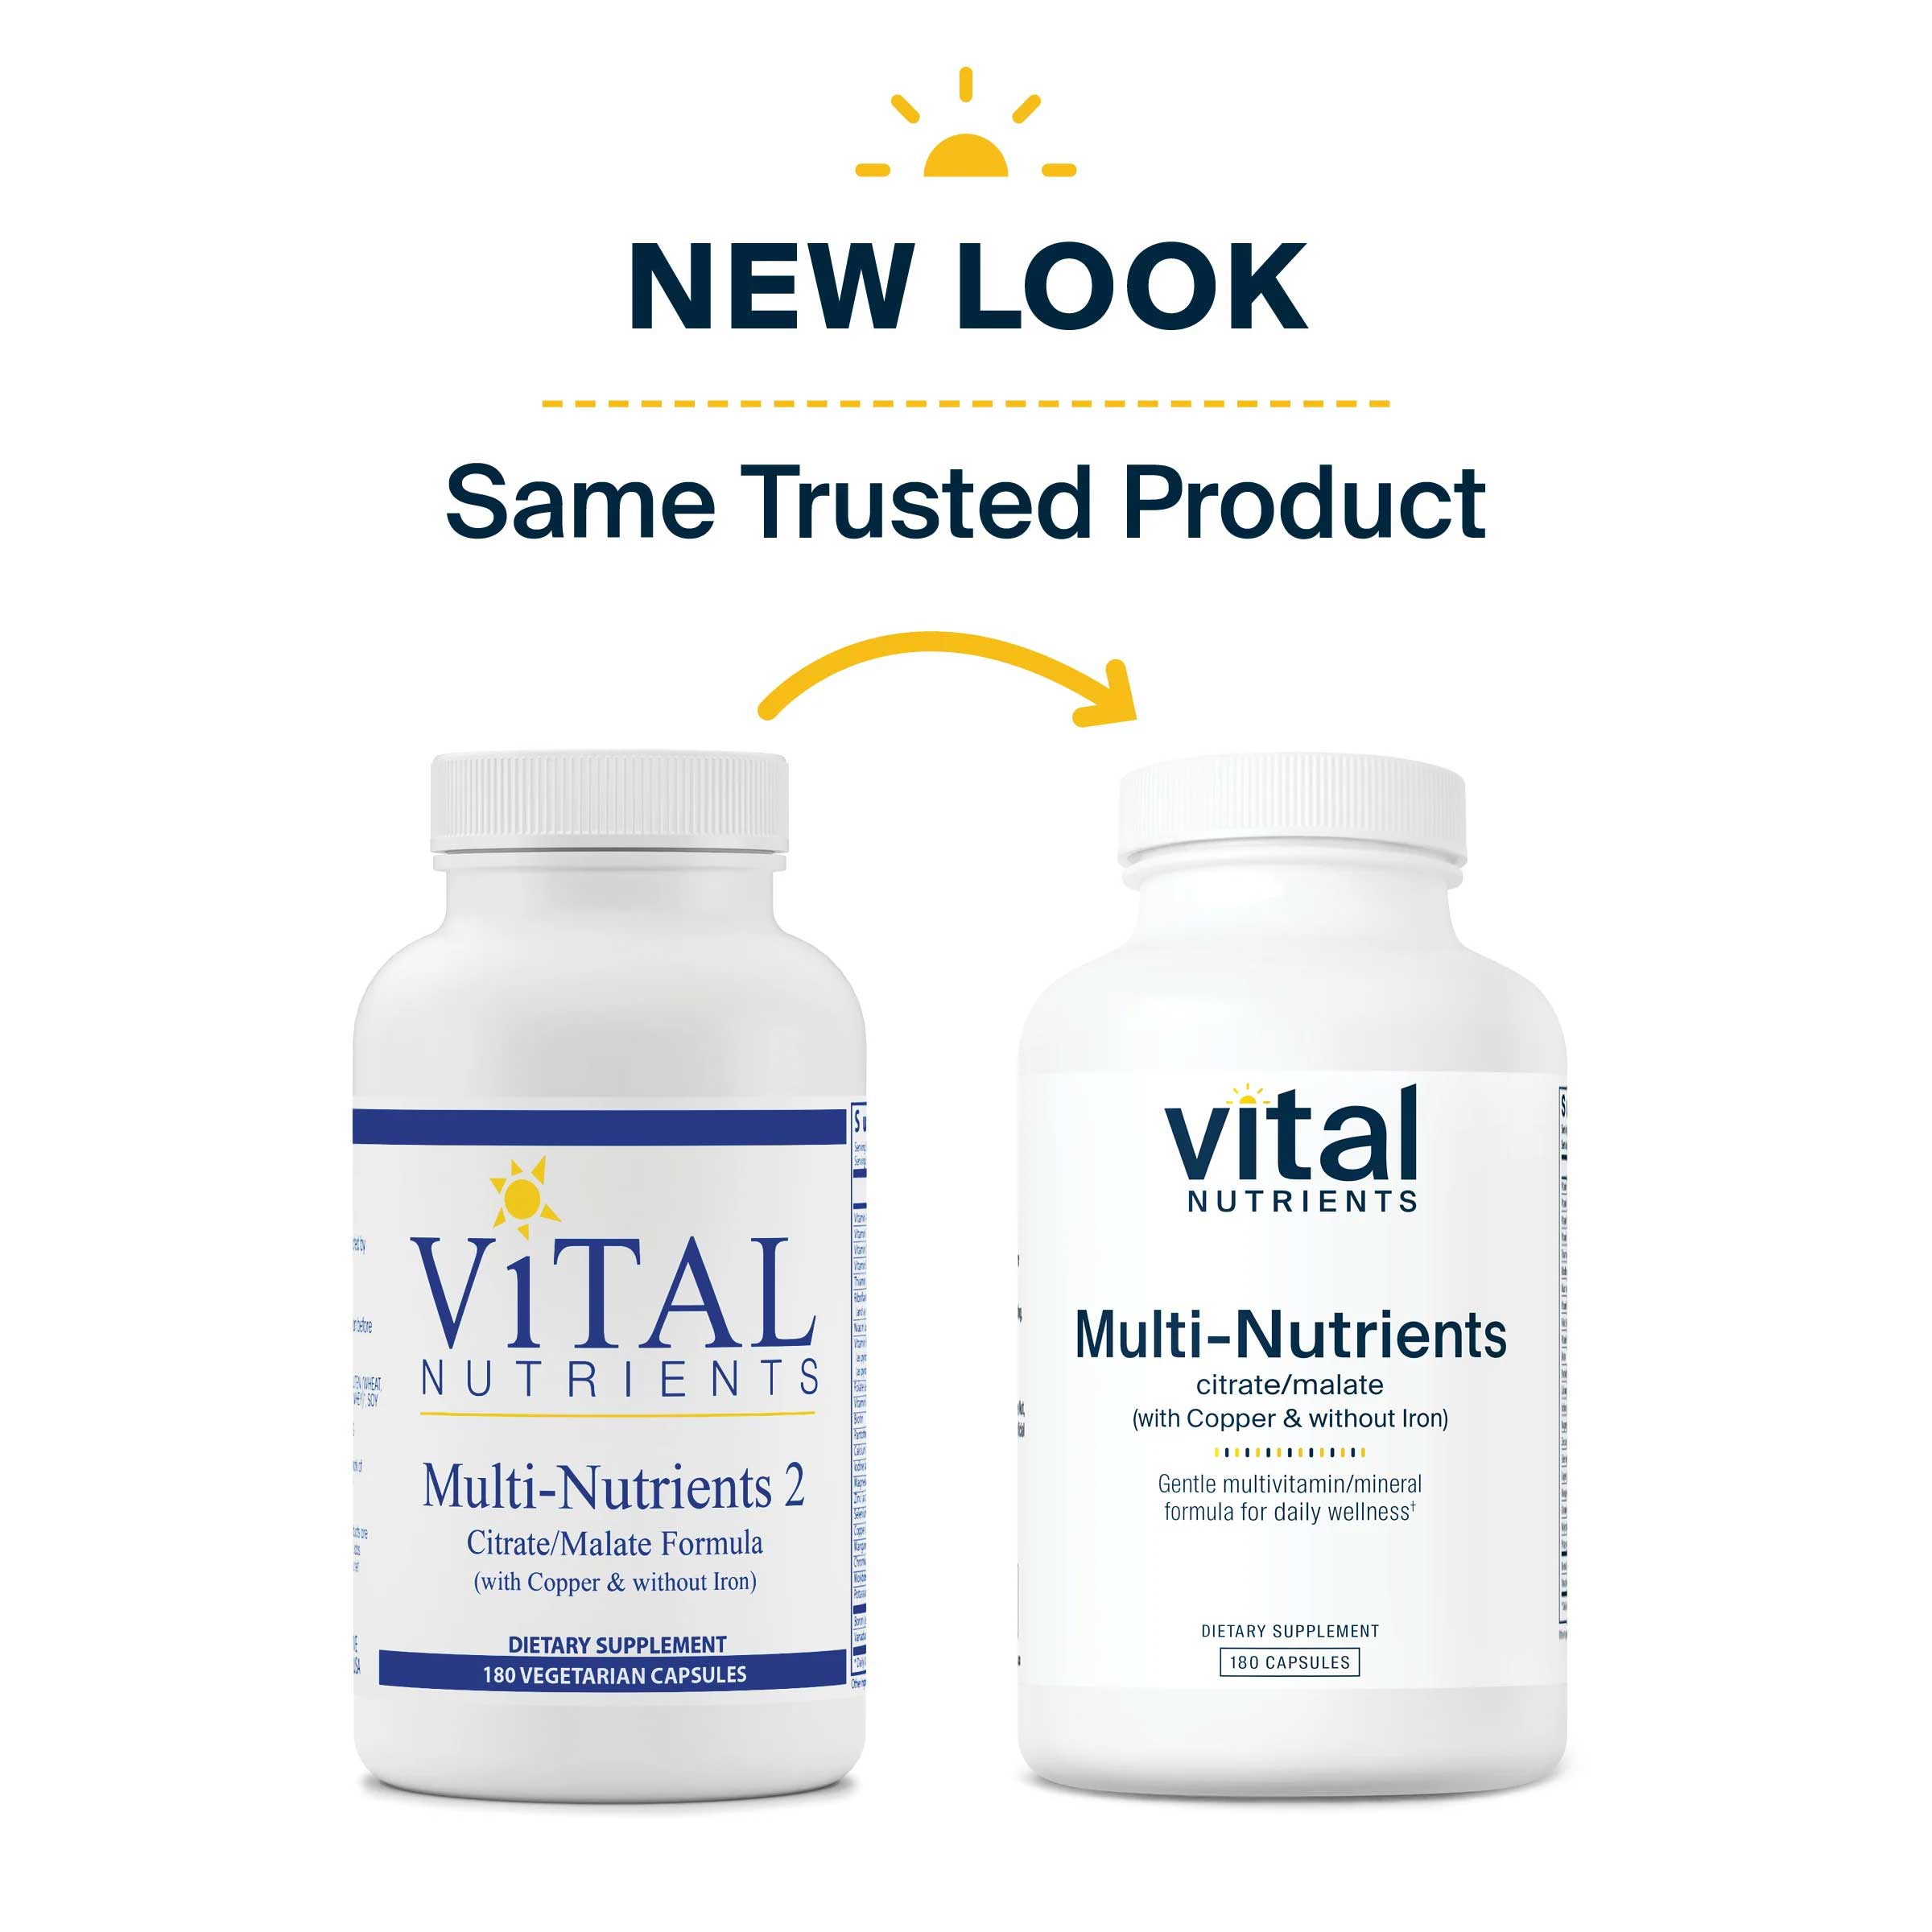 Vital Nutrients Multi-Nutrients Citrate/Malate with Copper, without Iron (Formerly Multi-Nutrients 2) New Look